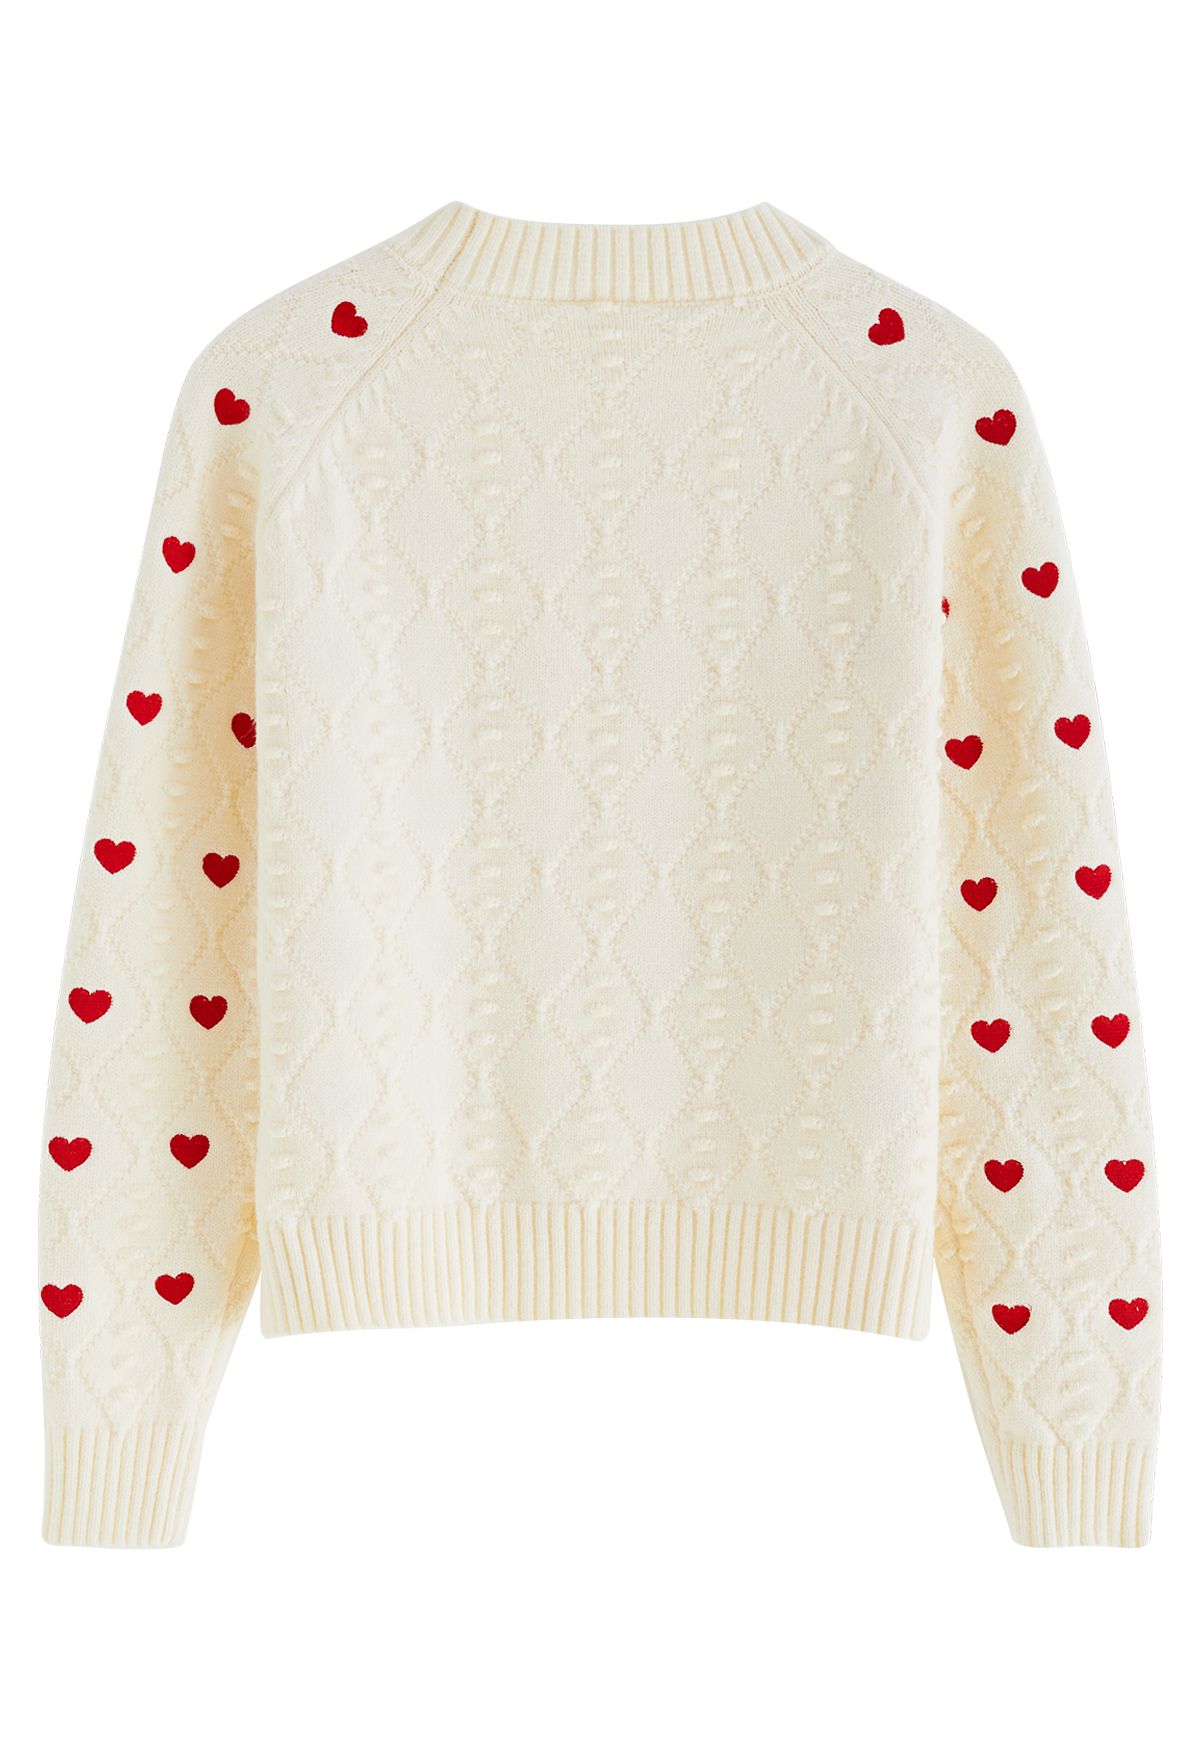 Full of Hearts Embroidered Emboss Knit Crop Sweater in Light Yellow ...